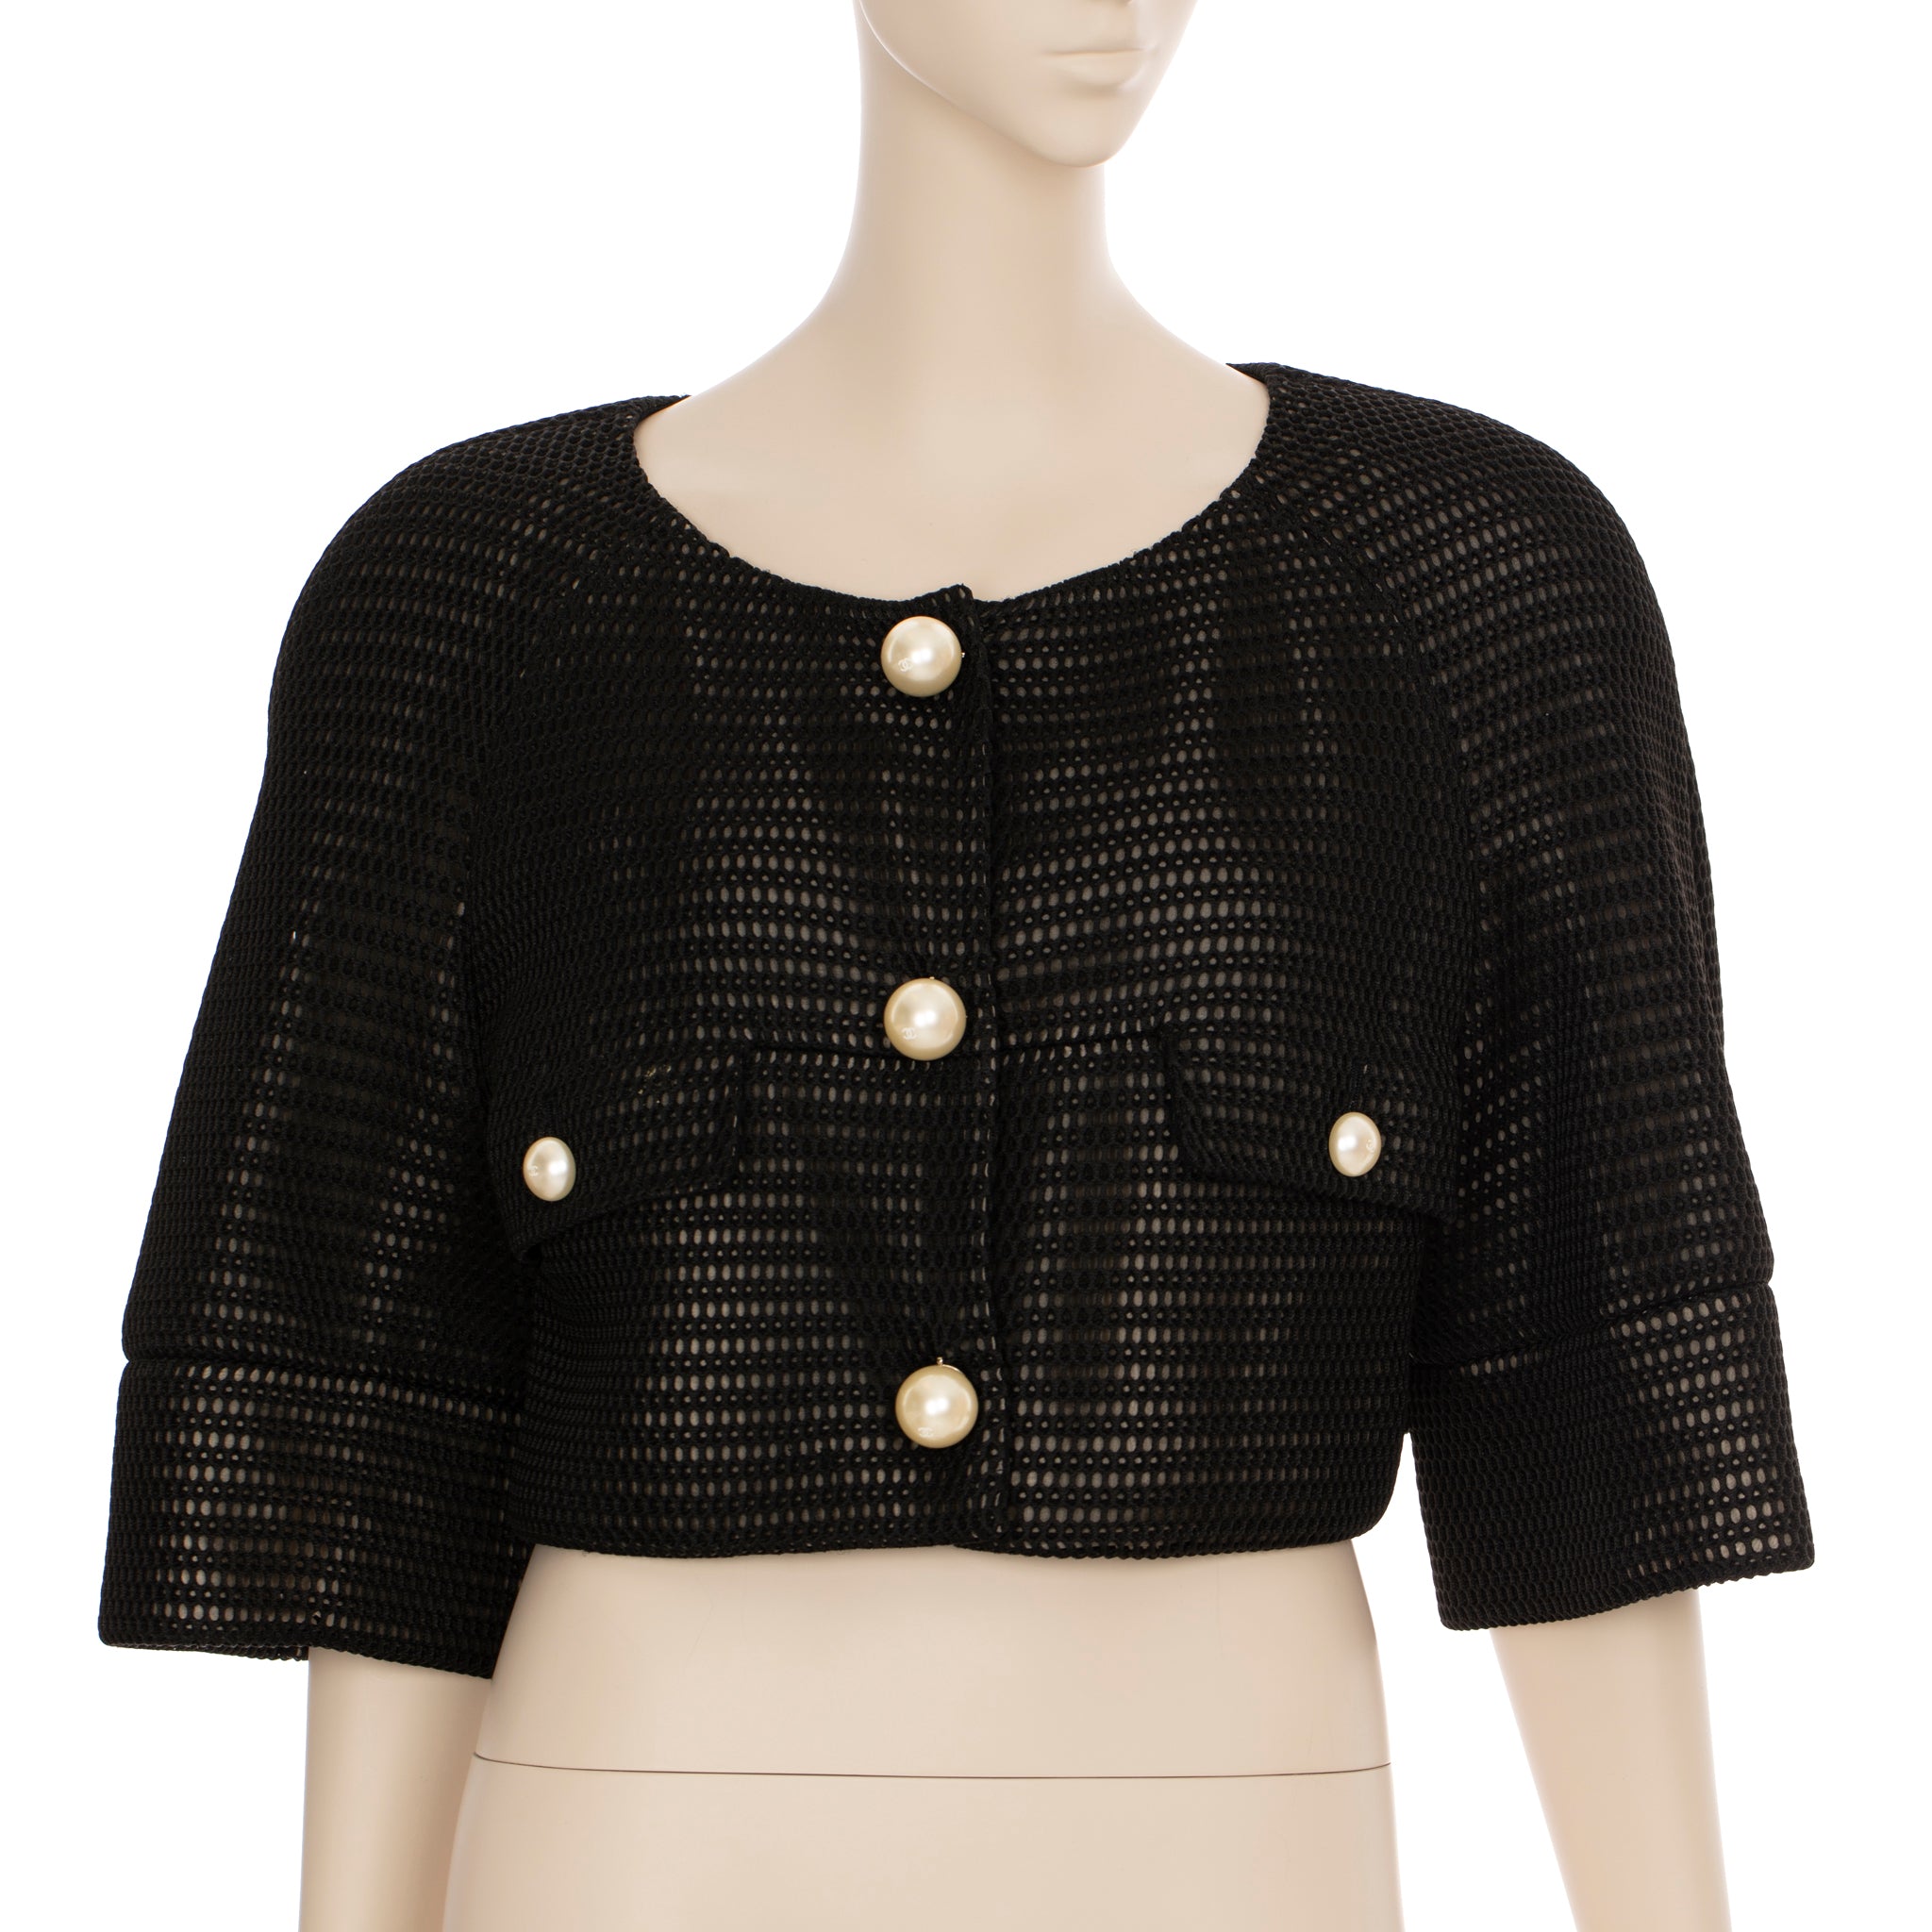 Chanel Crop Mesh Black Jacket With Faux Pearl Details 42 FR